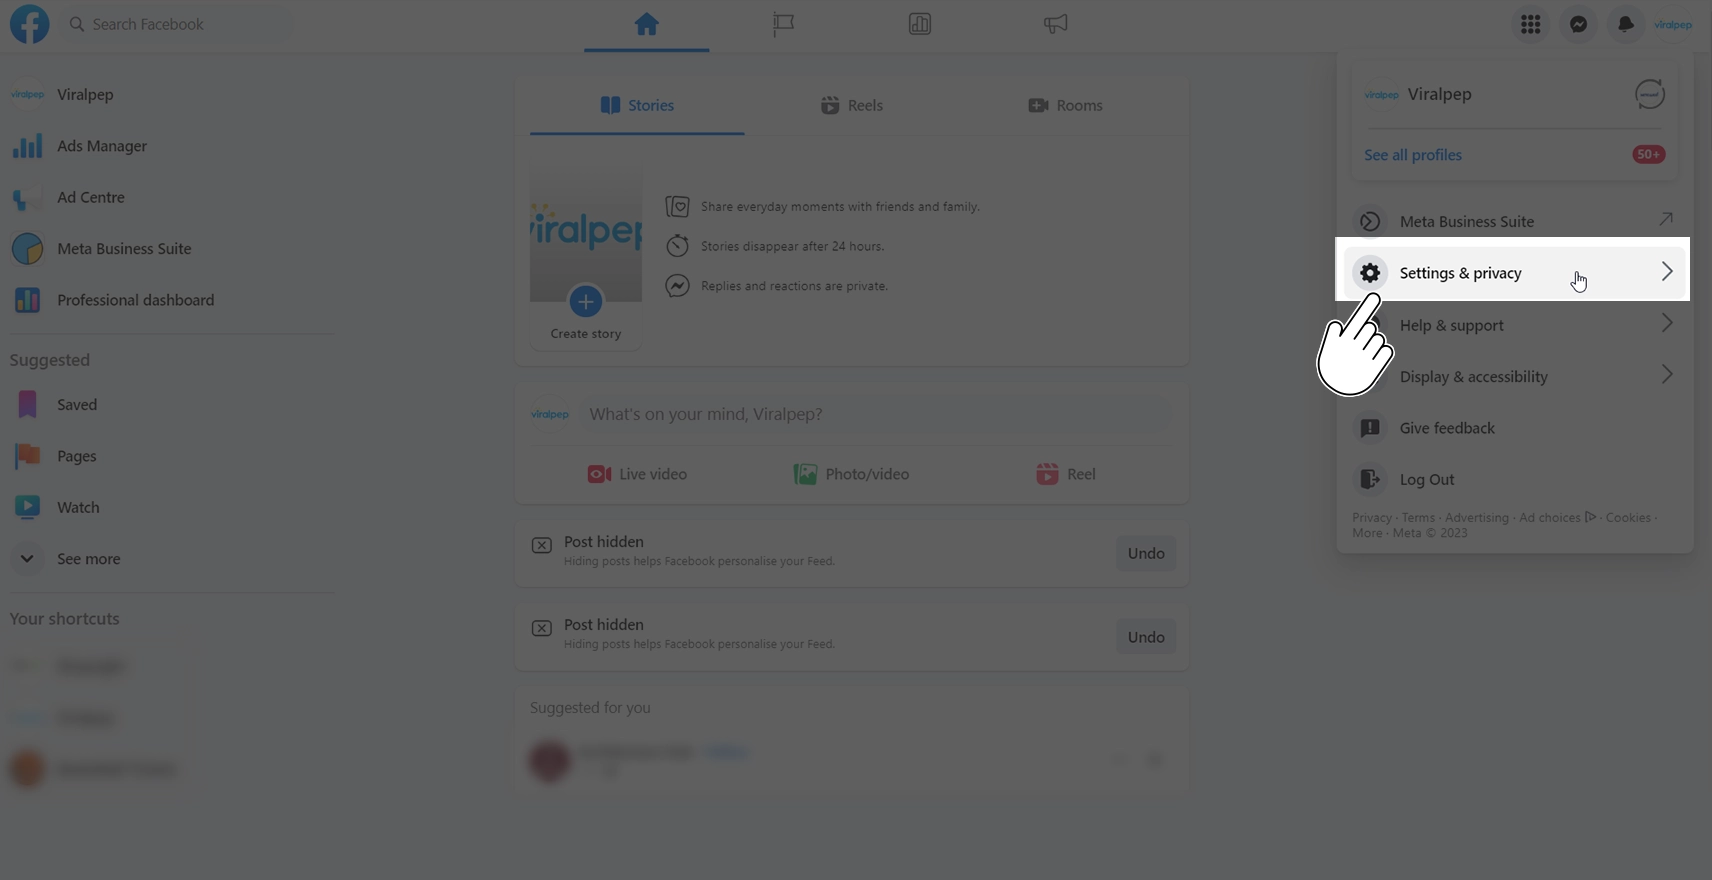 Select settings and privacy option in facebook desktop app